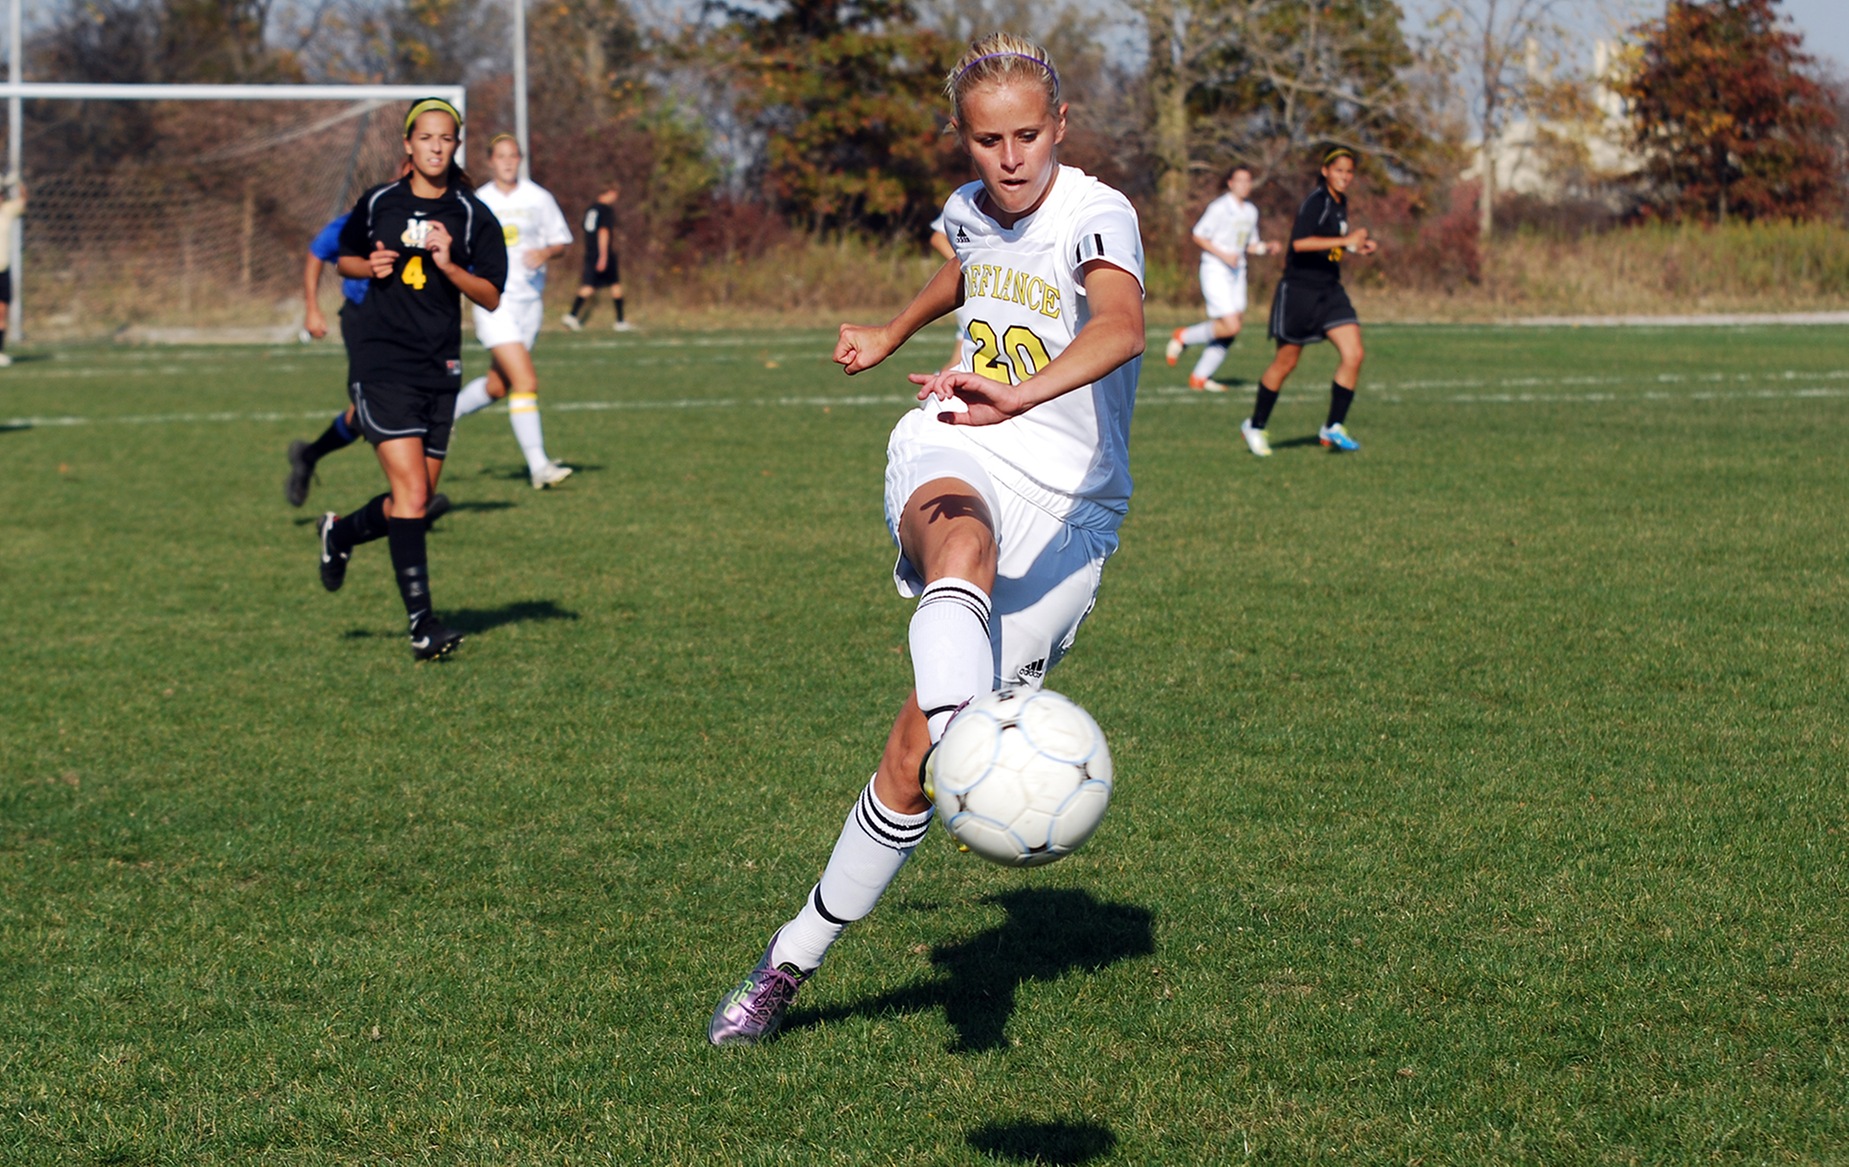 Women’s’ Soccer Ends in a 2-2 Draw at Bluffton